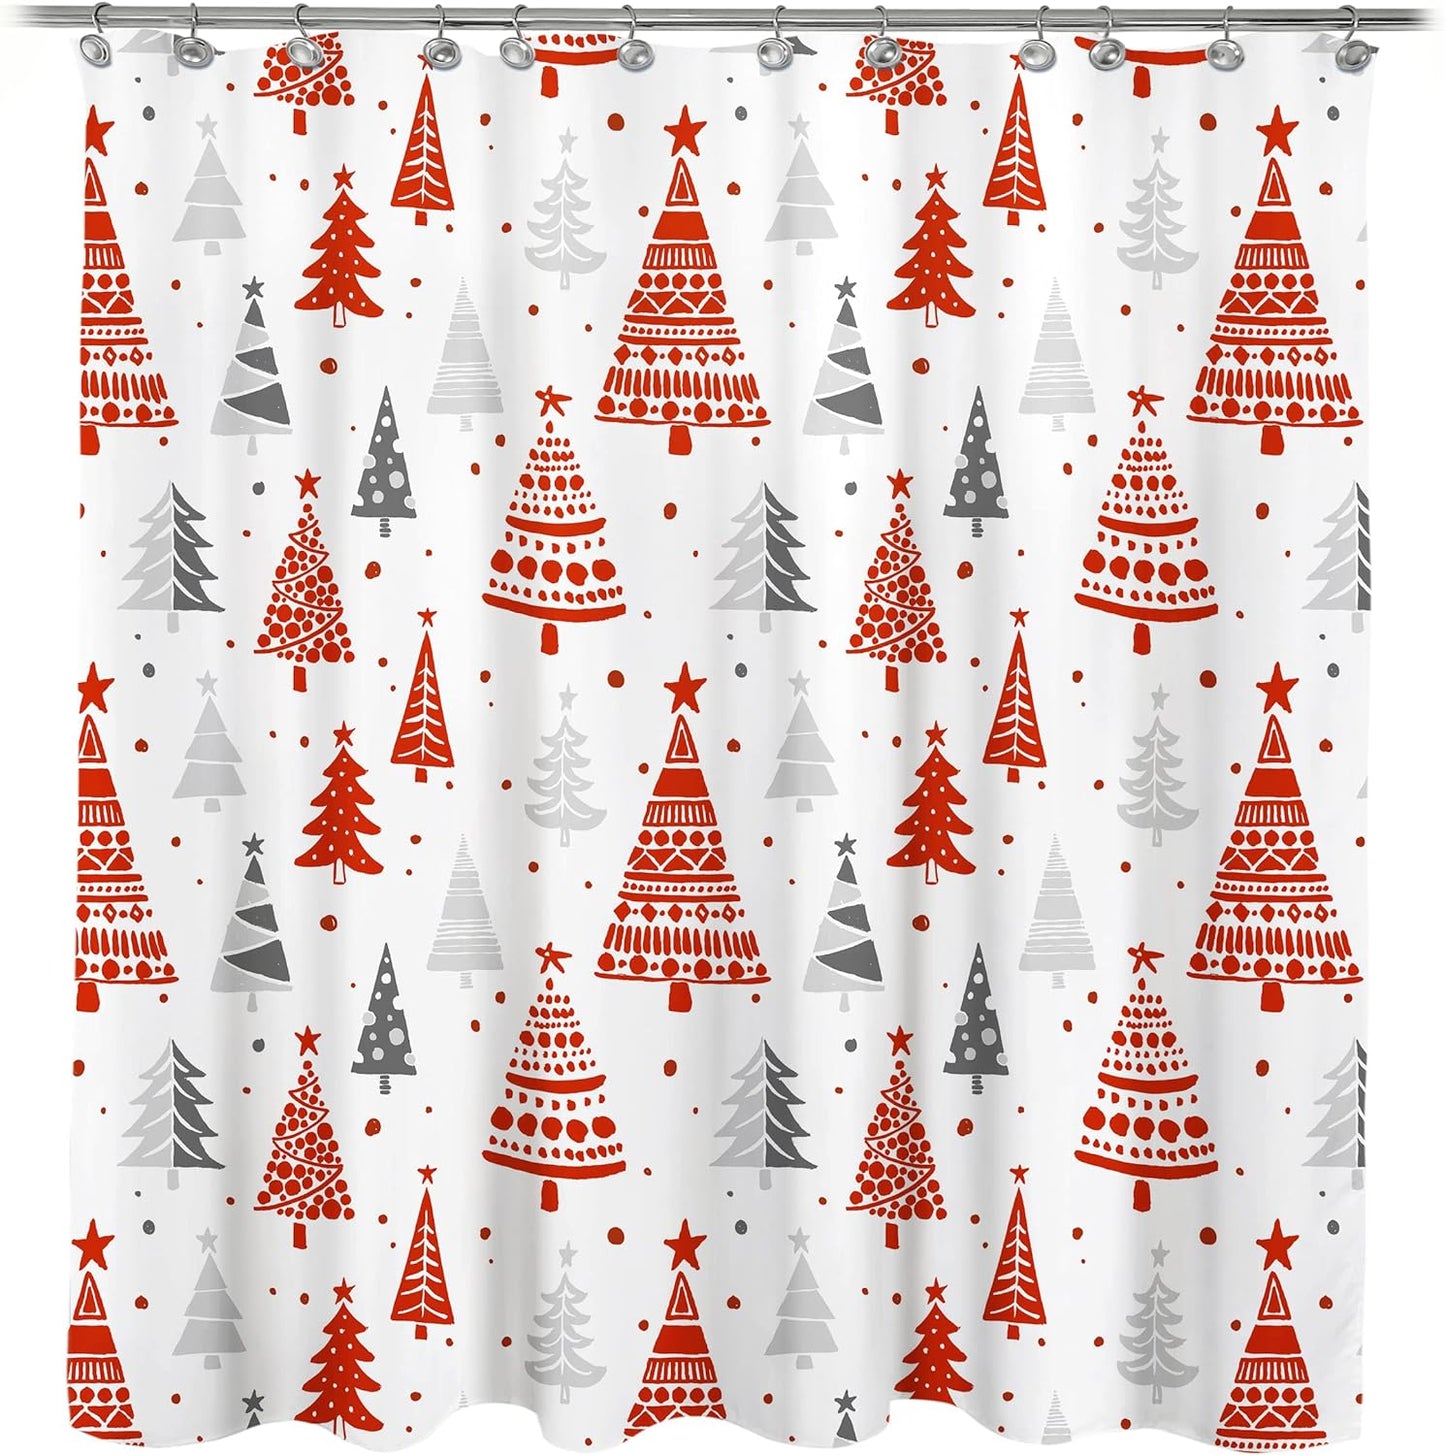 Christmas Shower Curtain, Red and Gray Xmas Trees with Stars and Snow Pattern Shower Curtain for Bathroom Decor, 71x71 Inch